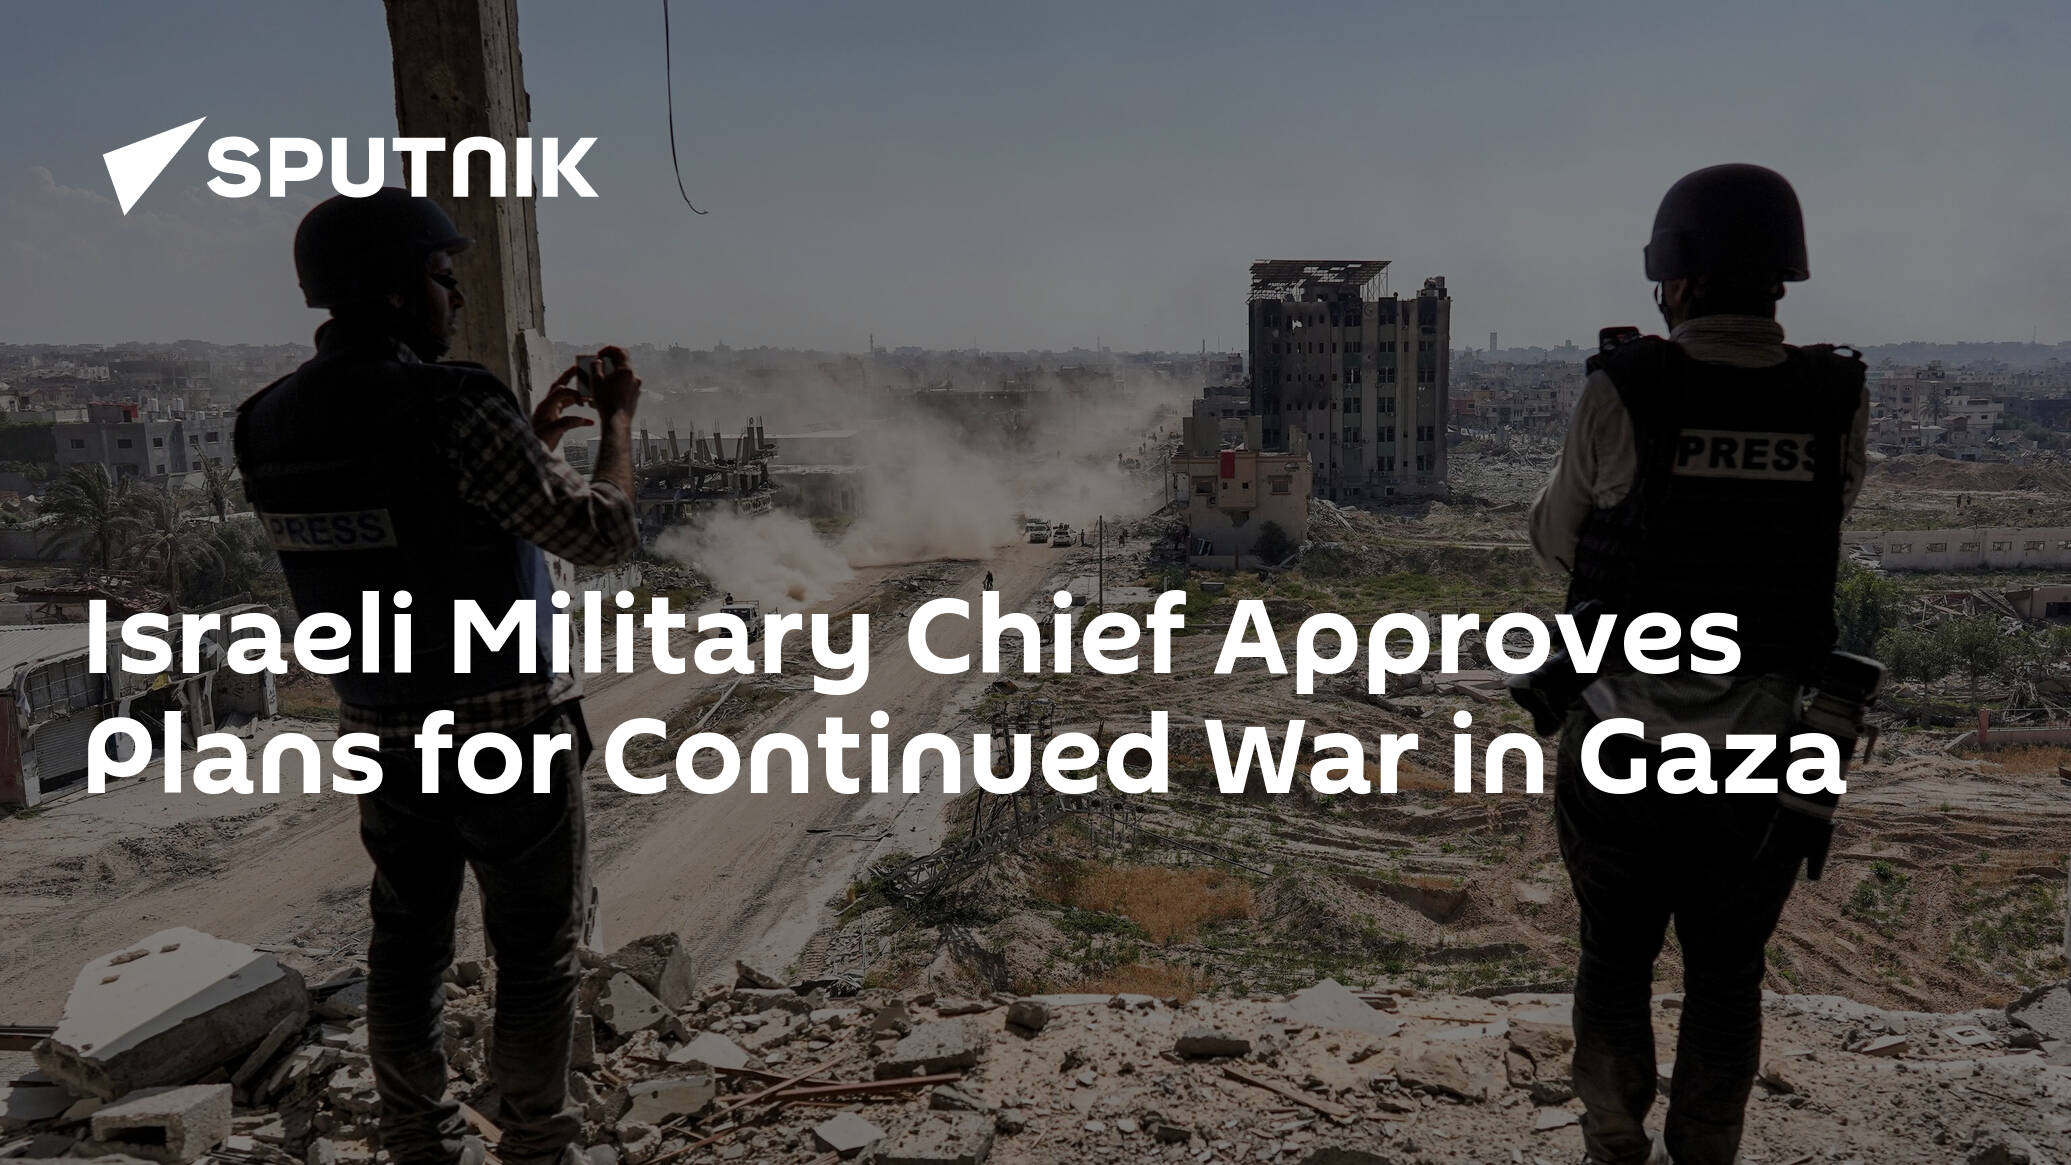 Israeli Military Chief Approves Plans for Continued War in Gaza